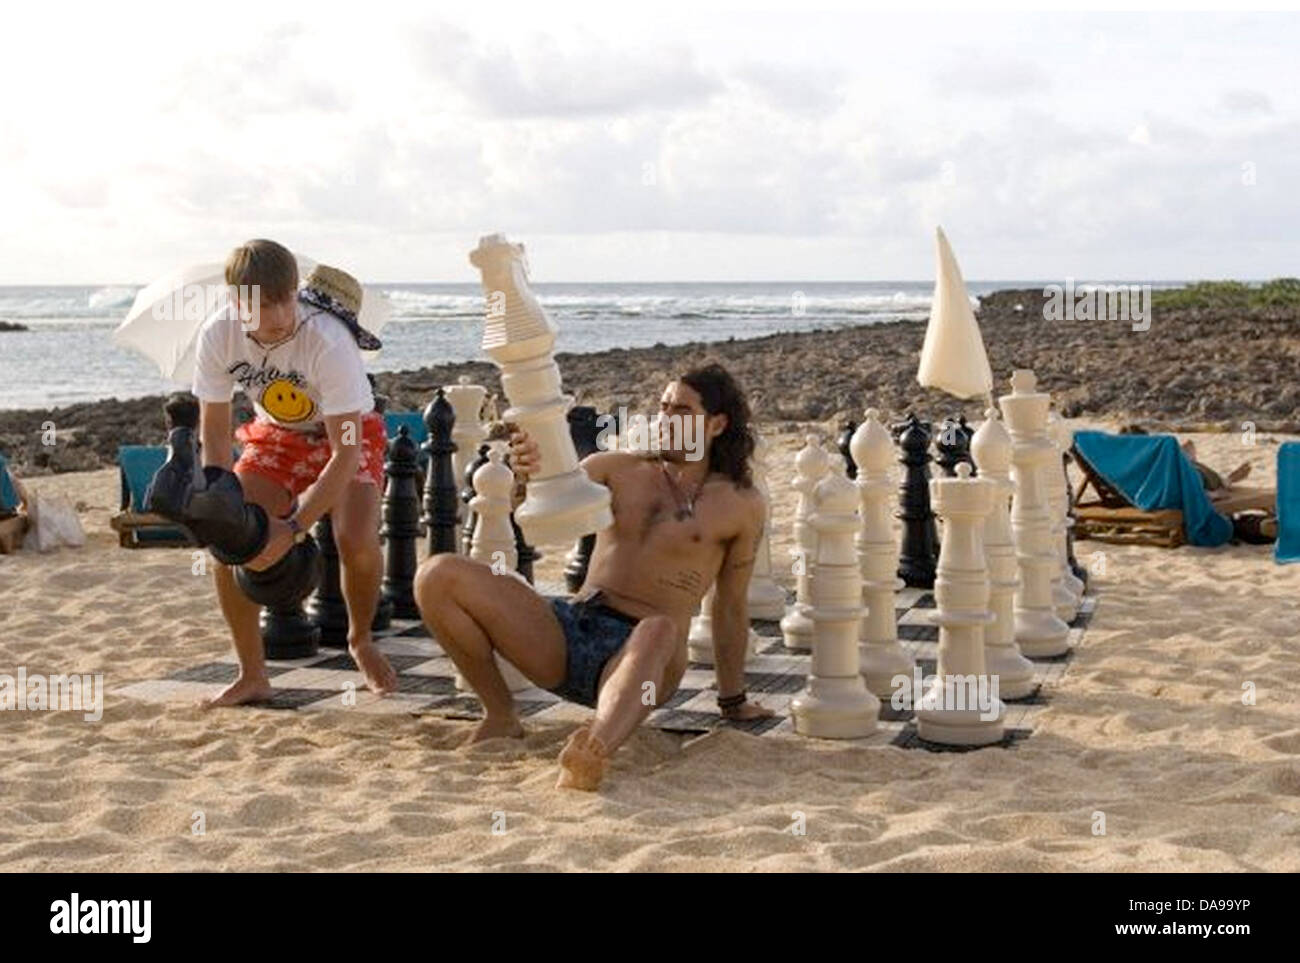 FORGETTING SARAH MARSHALL 2011 Universal Pictures film with Russell Brand at right Stock Photo